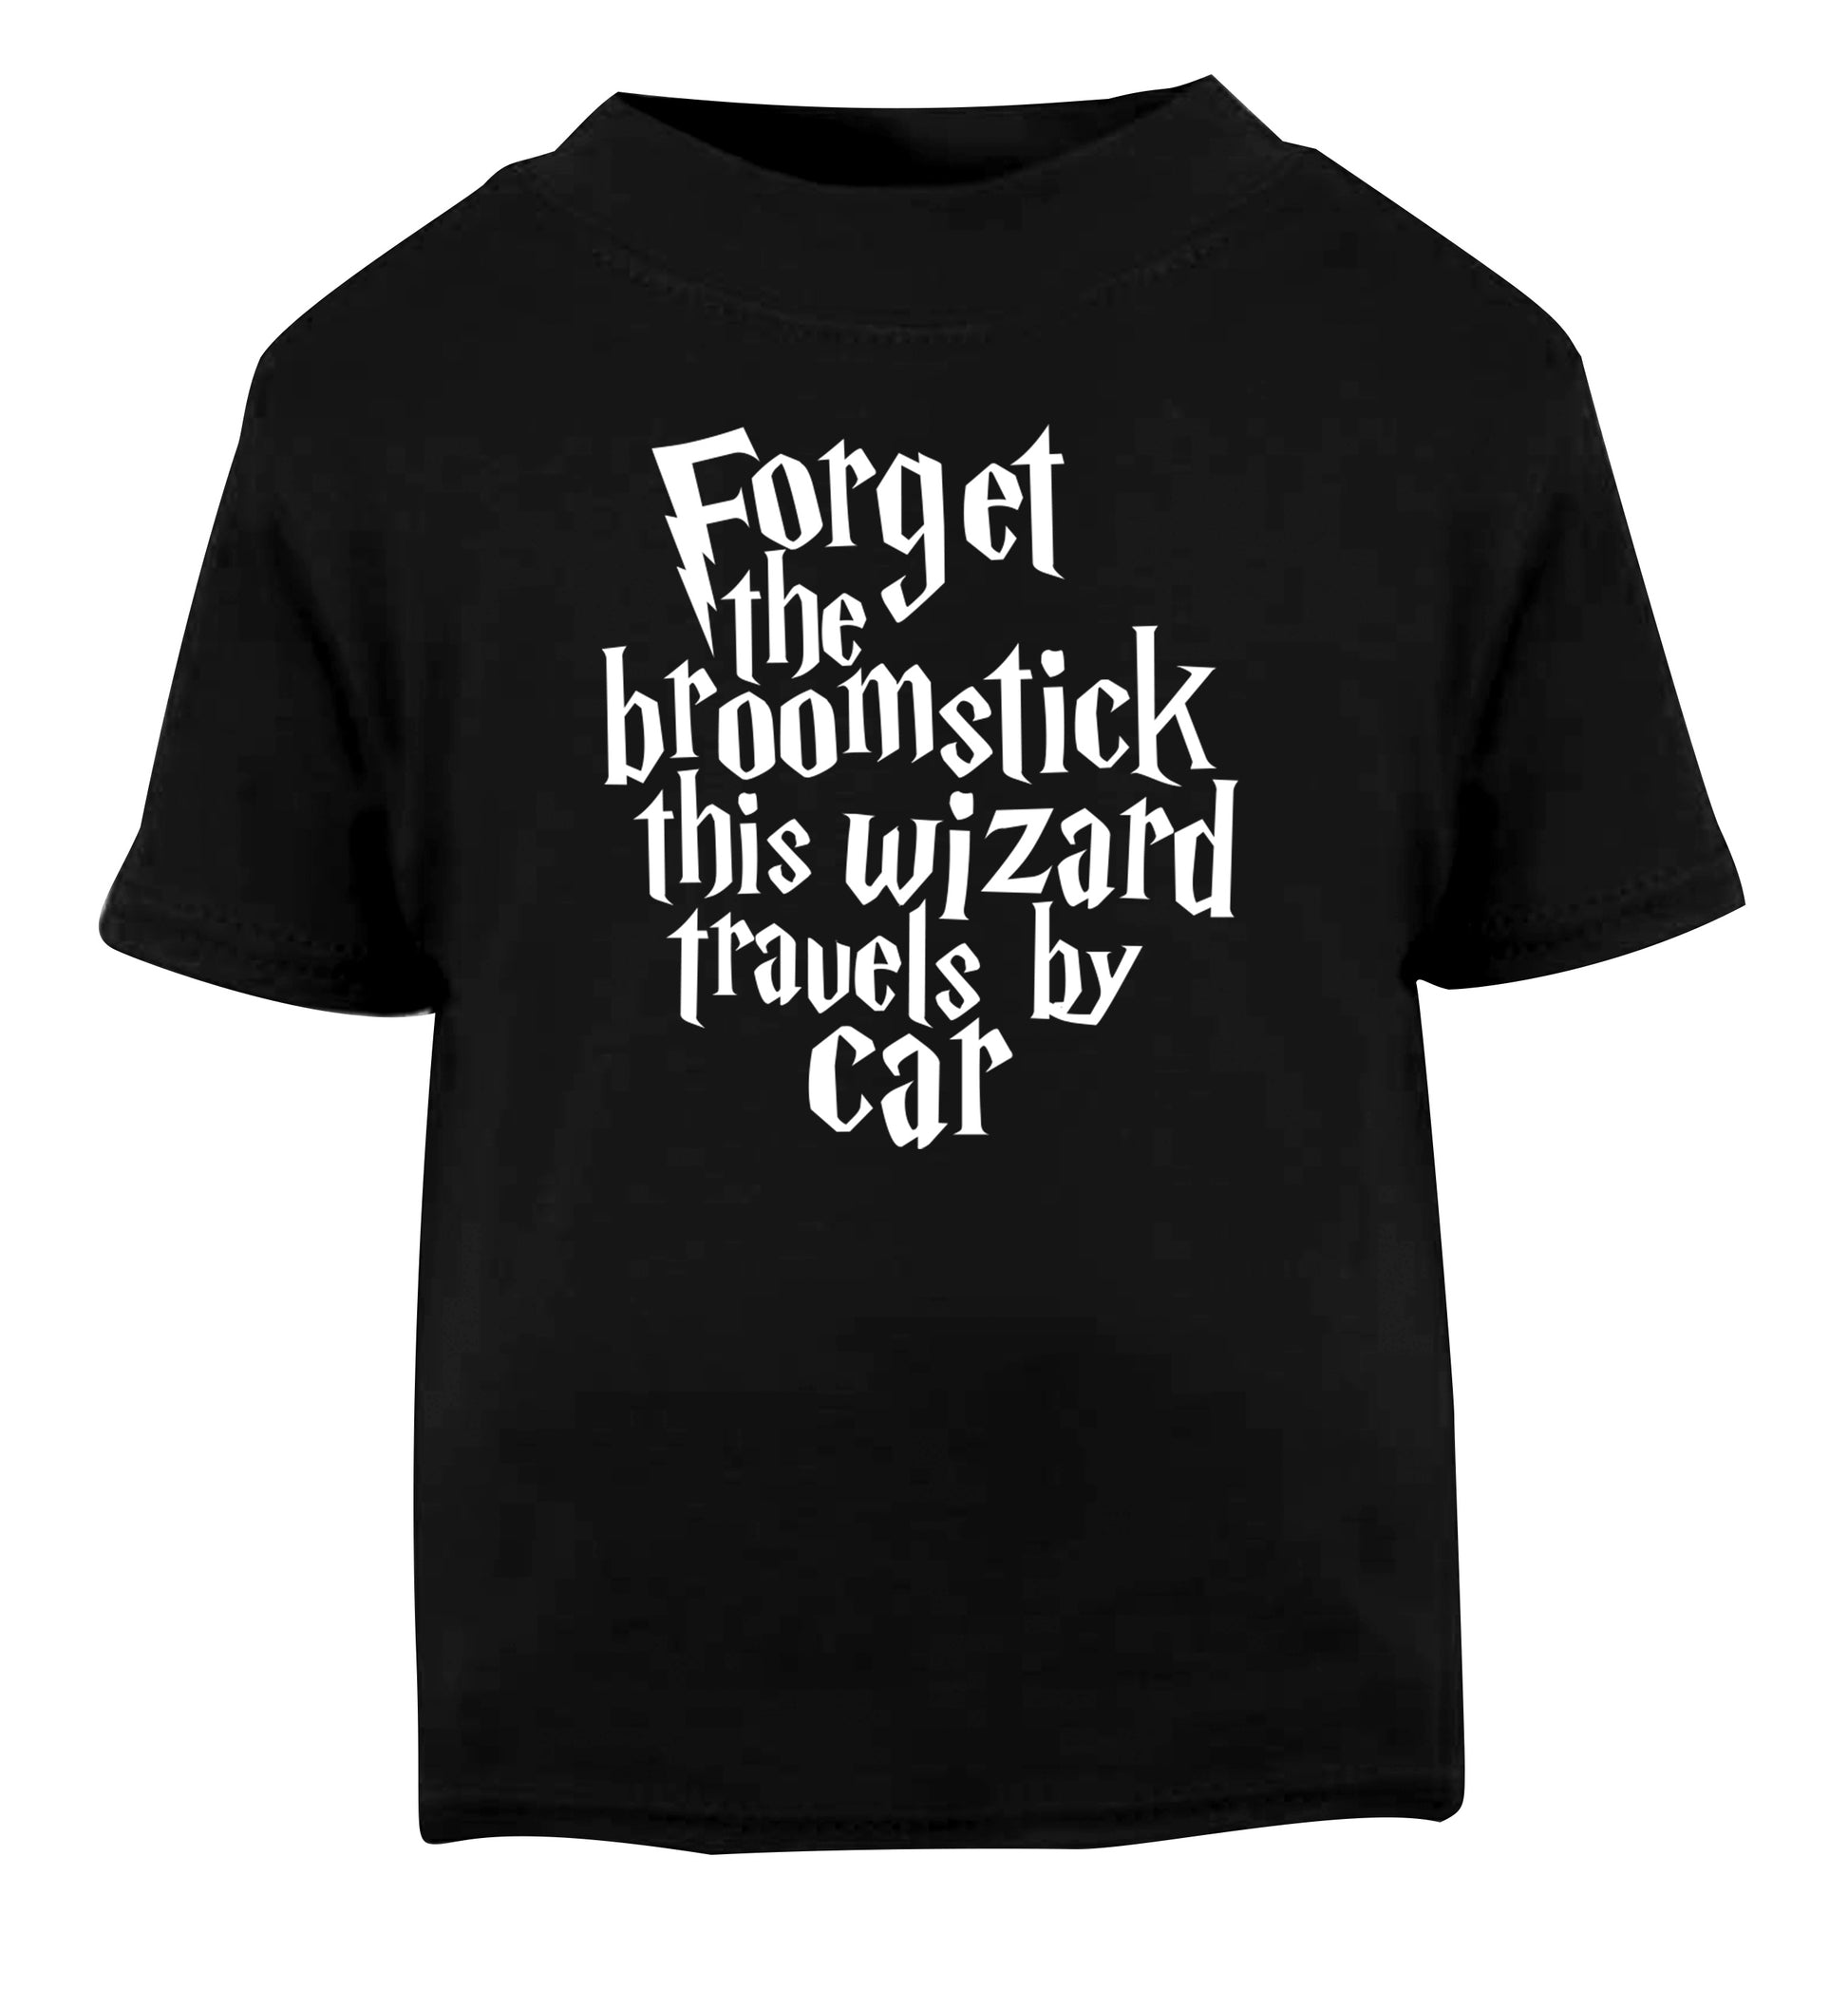 Forget the broomstick this wizard travels by car Black Baby Toddler Tshirt 2 years